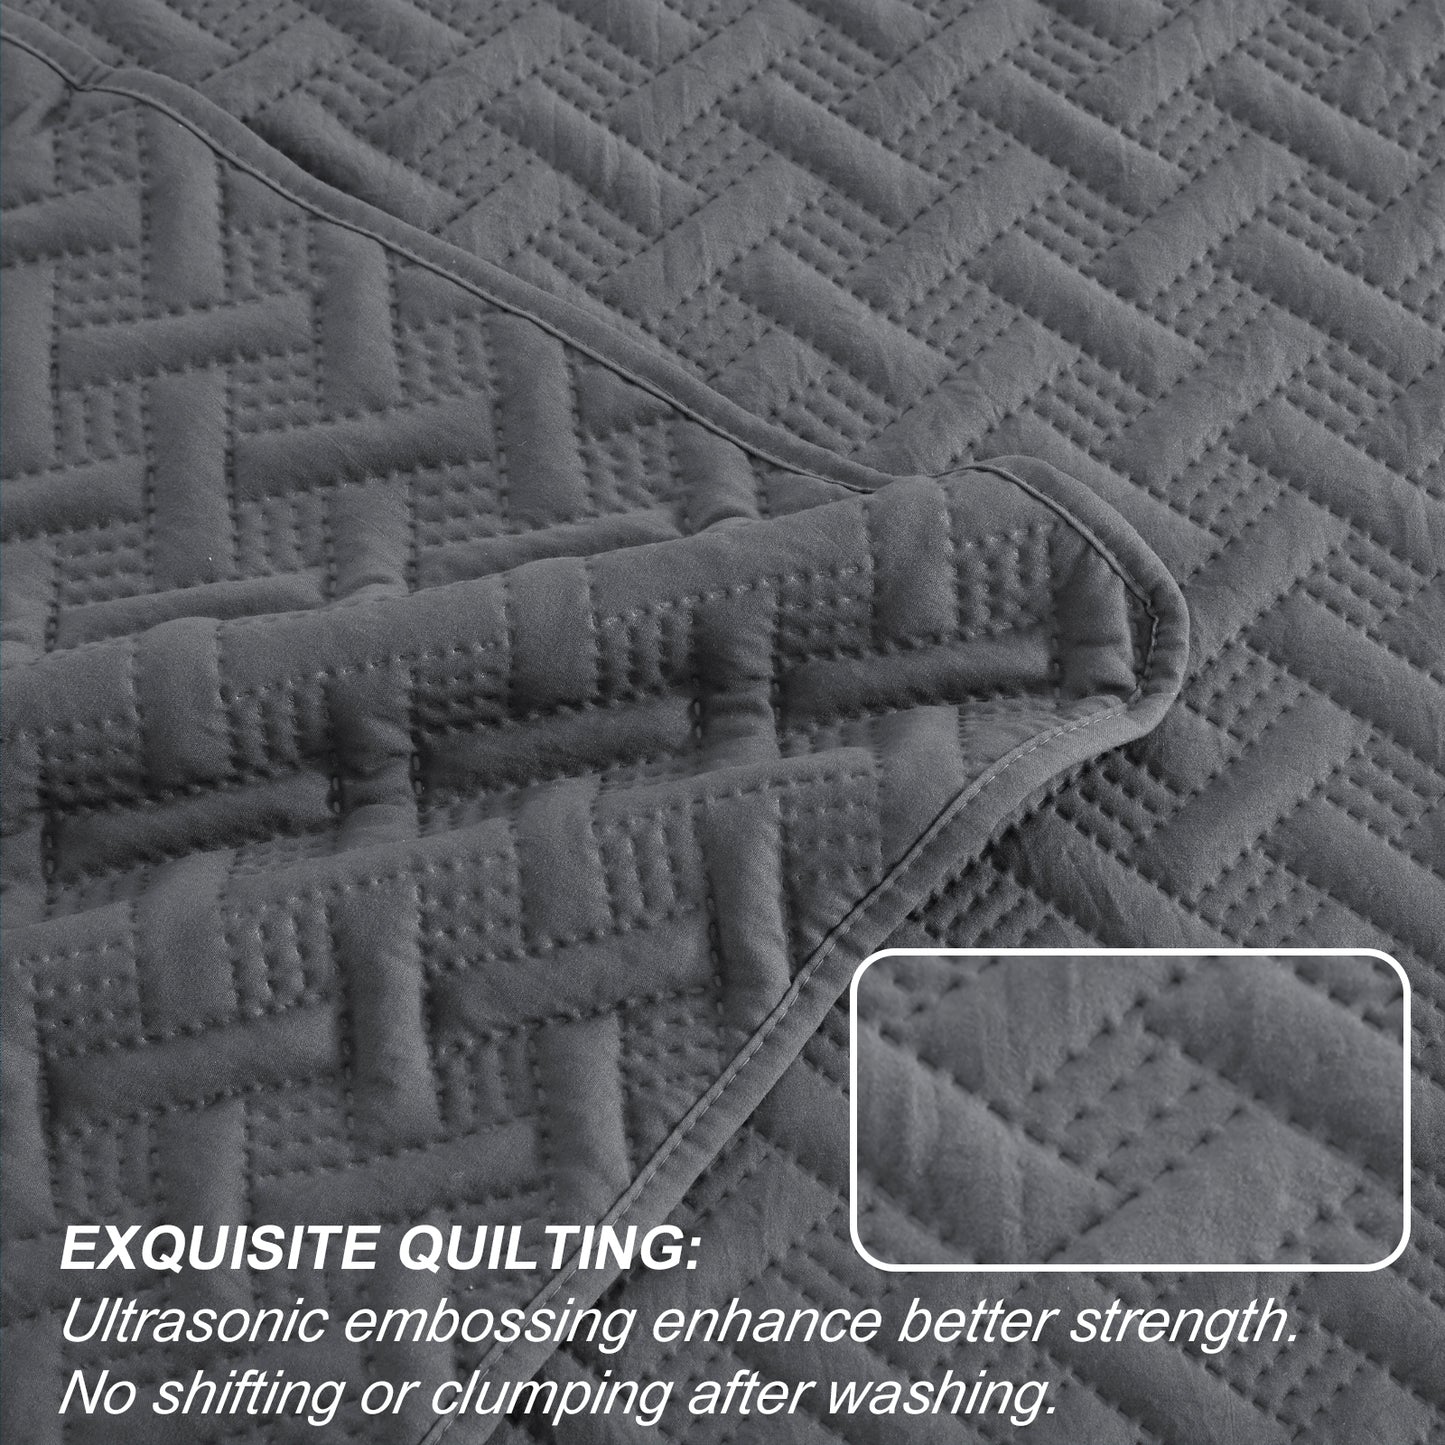 Exclusivo Mezcla 2-Piece Gray Twin Size Quilt Set, Weave Pattern Ultrasonic Lightweight and Soft Quilts/Bedspreads/Coverlets/Bedding Set (1 Quilt, 1 Pillow Sham) for All Seasons